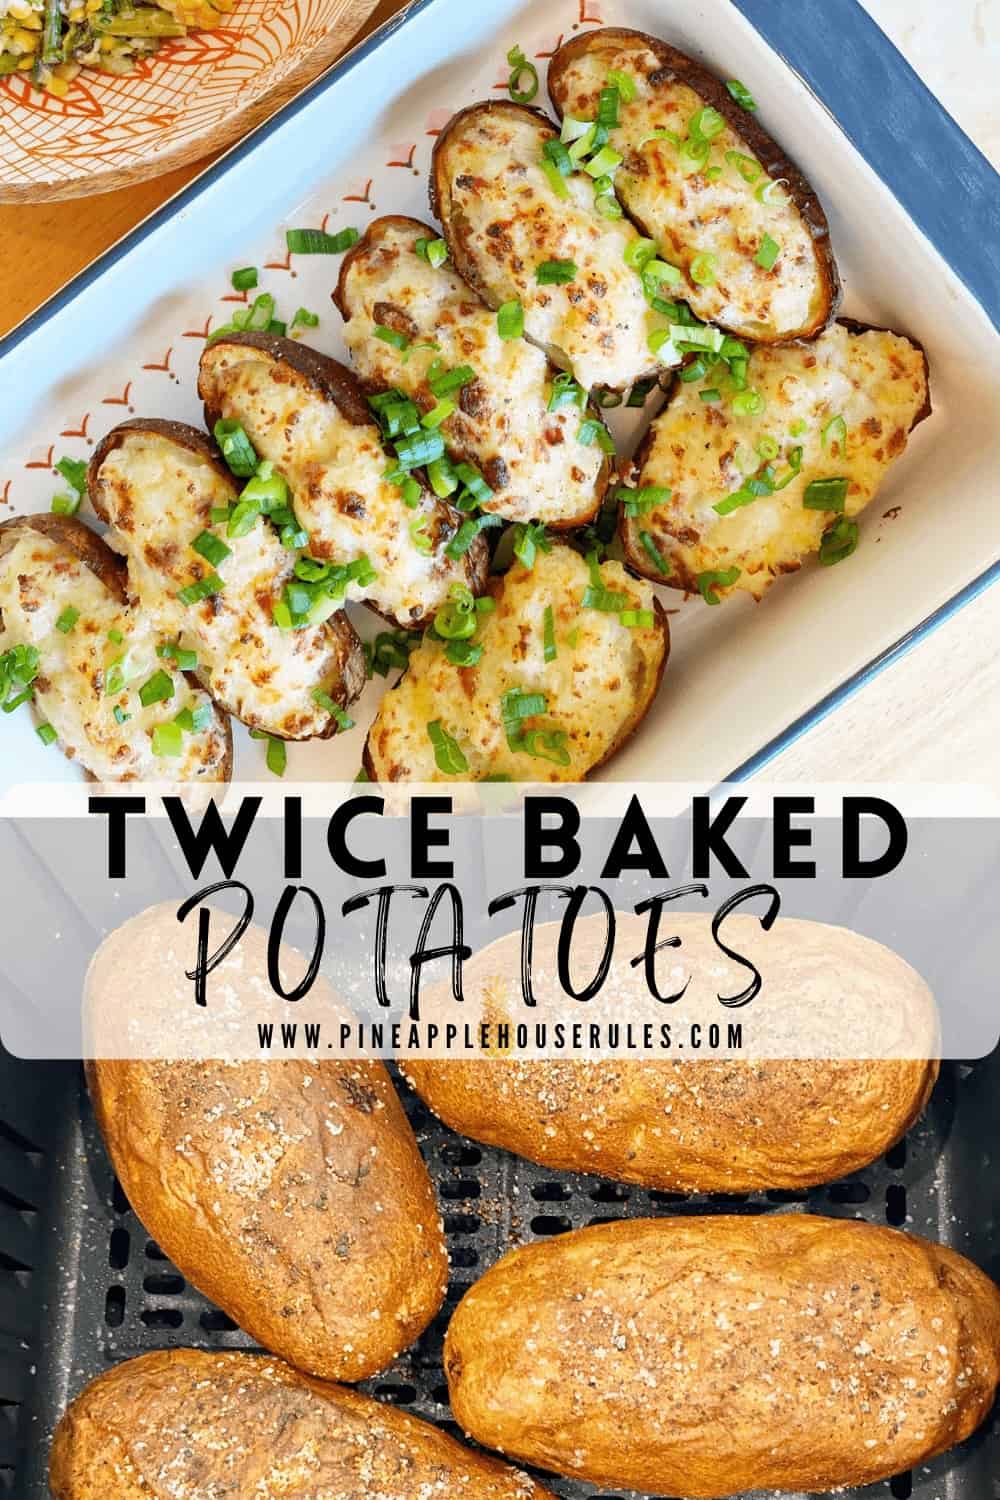 Twice Baked Potatoes are an easy, delicious side dish recipe that's perfect for a summer grilling day! They can be baked ahead of time and assembled later. You can easily bake these in an air fryer or in the oven! Twice Baked Potatoes Recipe | Air Fryer Recipes | Twice Baked Potatoes | Twice Baked Potatoes Easy | Twice Baked Potatoes Air Fryer | Twice Baked Potatoes Easy Simple | Baked Potatoes in the Oven | Baked Potatoes in Air Fryer | Baked Potato | Easy Dinner Recipes | Easy Side Dishes